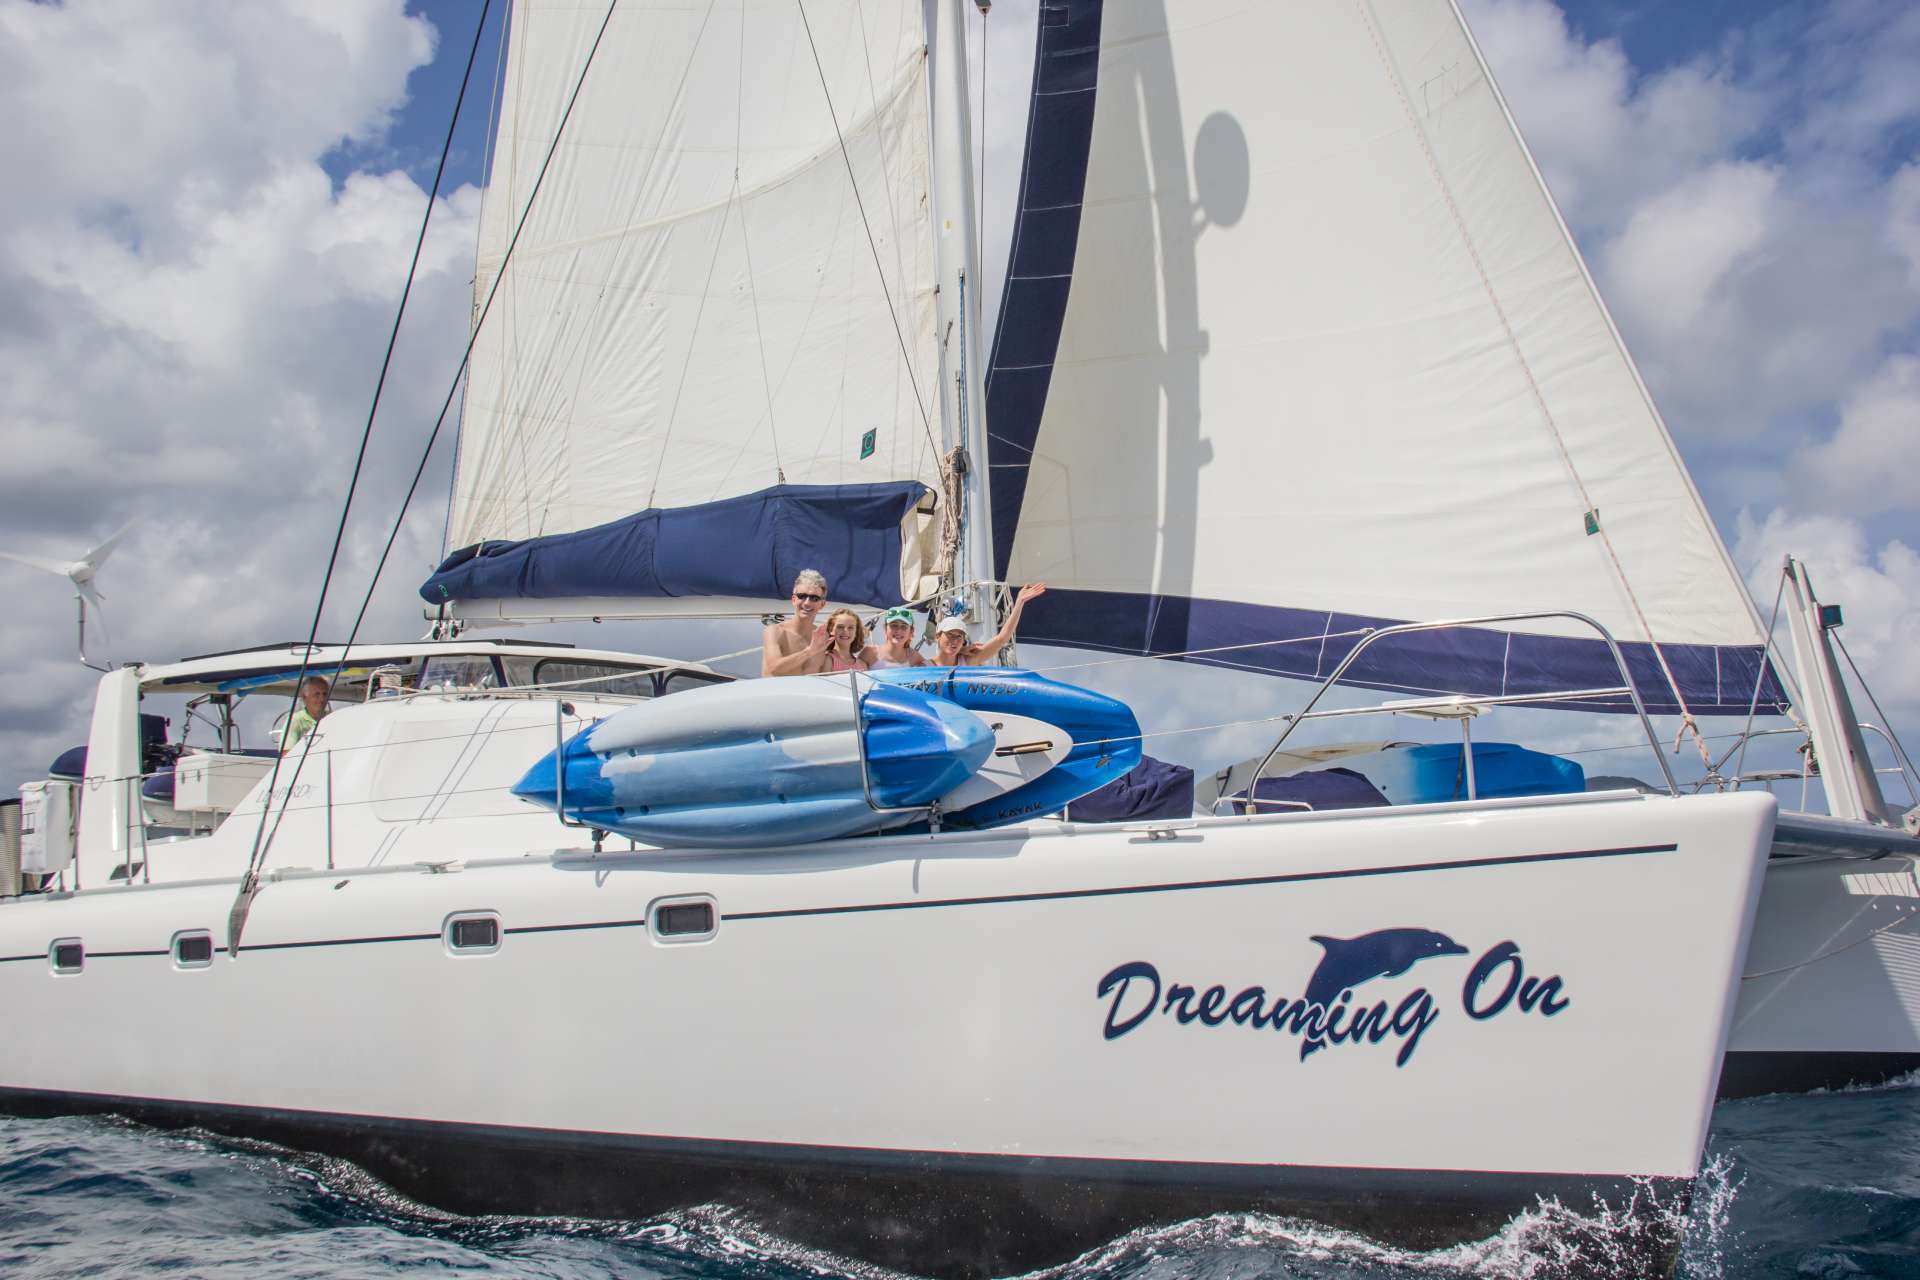 DREAMING ON Yacht Charter - Ritzy Charters